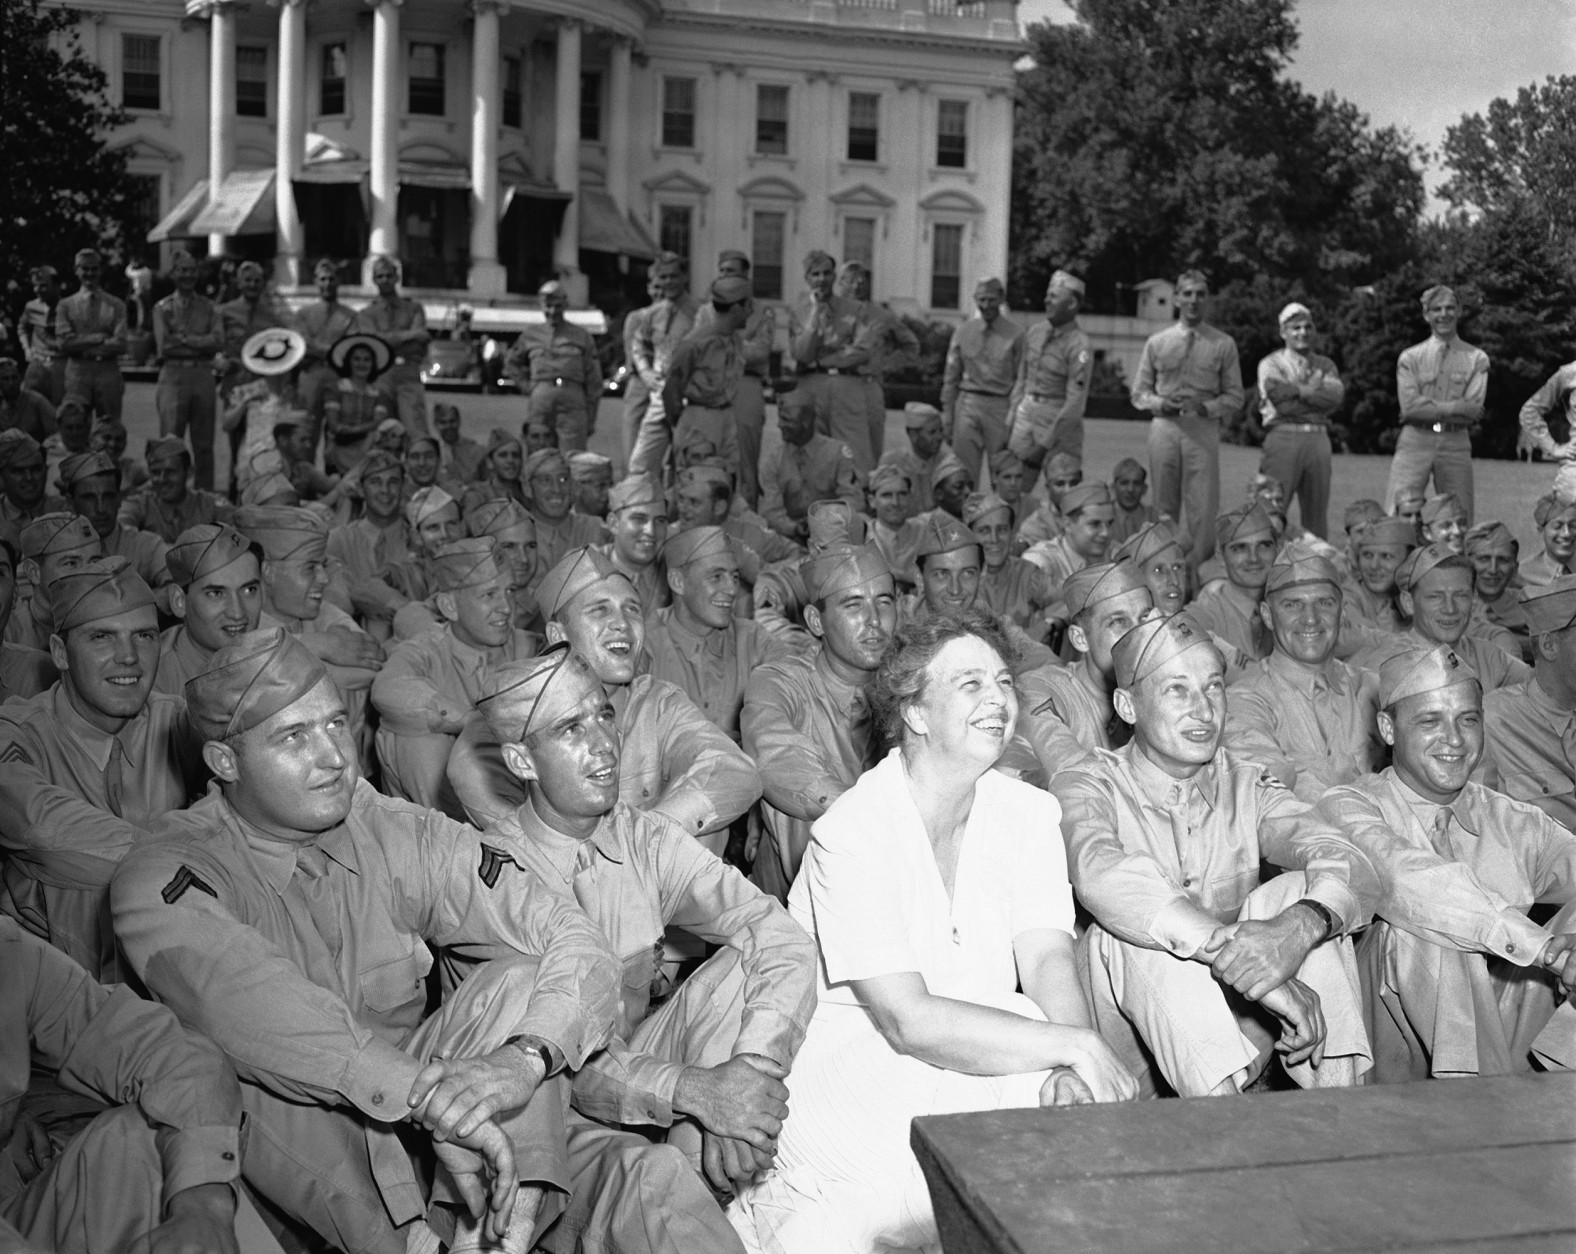 Mrs. Eleanor Roosevelt joined her guests  as she entertained at a Garden Party on June 12, 1942  in Washington at the south lawn of the White House for the over 400 soldiers detailed to guard the executive mansion. They were watching an entertainer. (AP Photo)